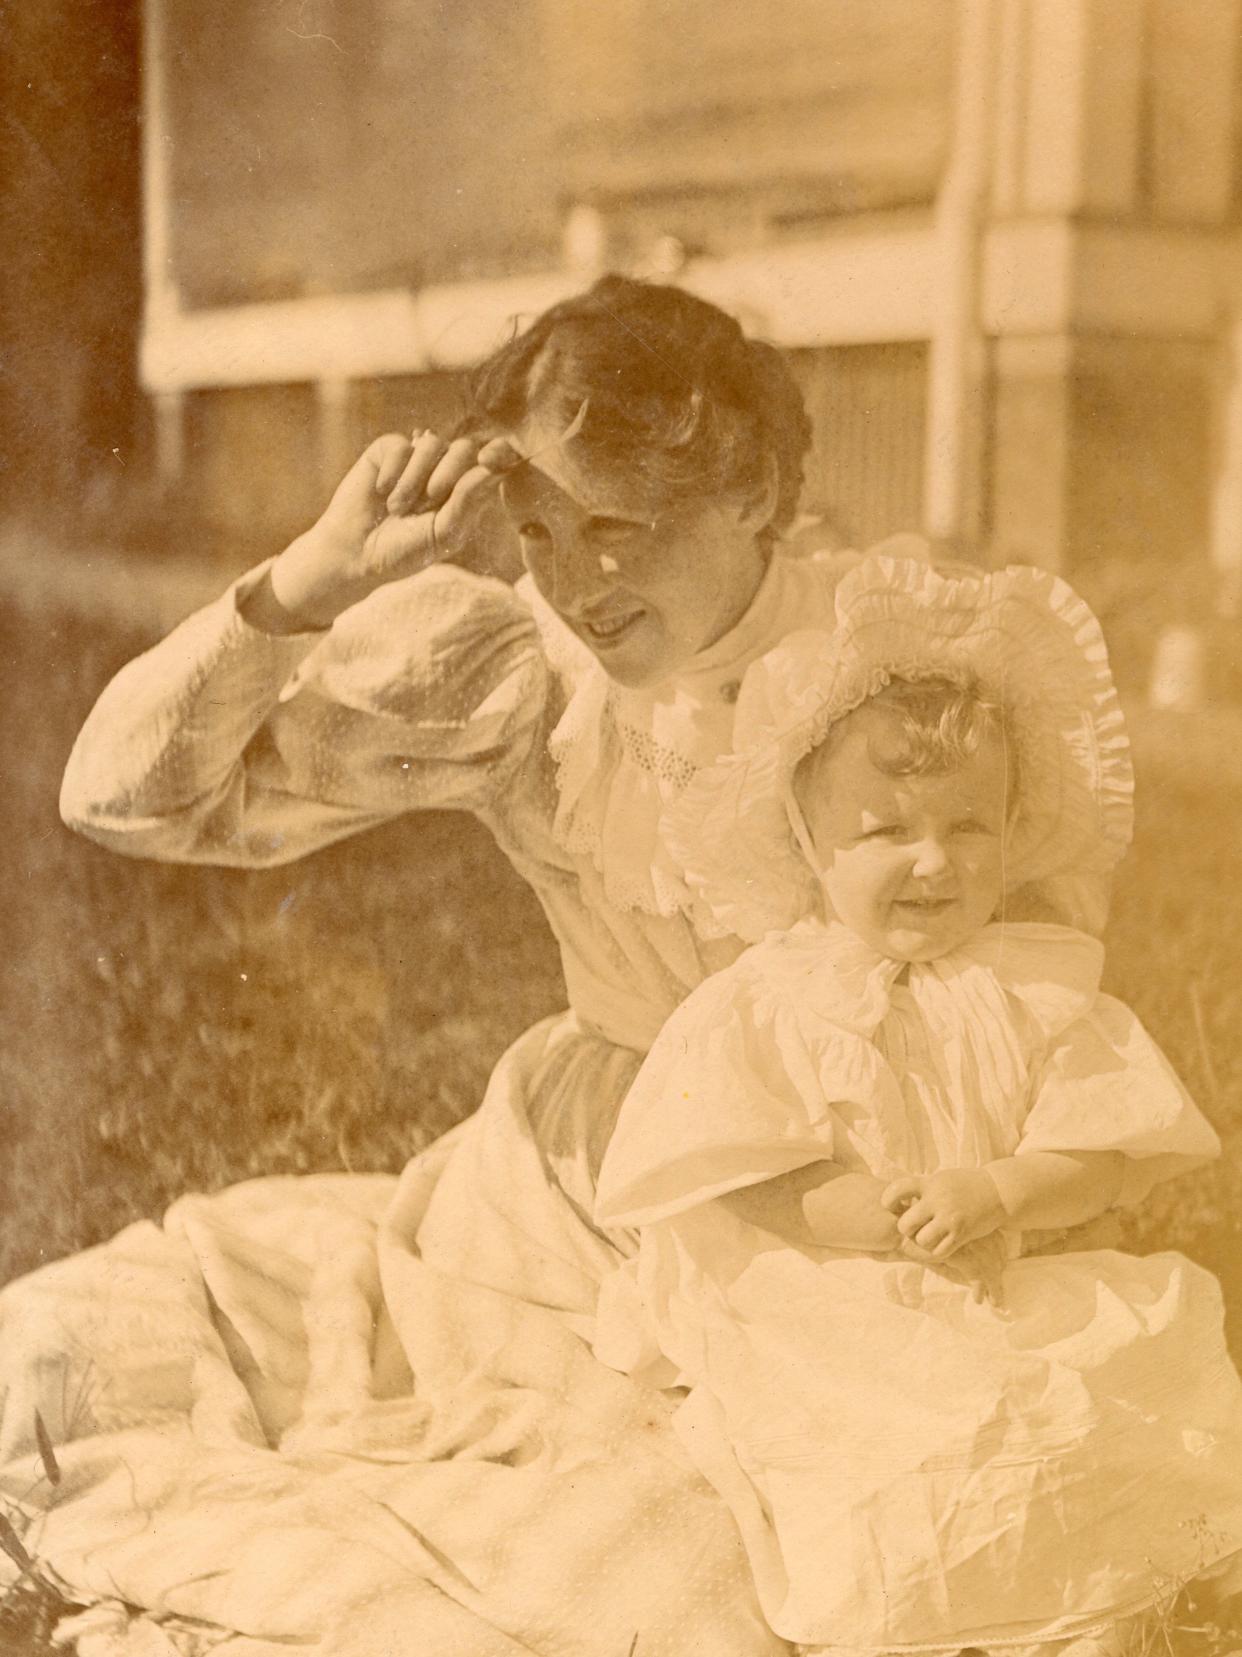 Sarah Bissell "Bessie" Whitman Benson holds her firstborn, Marjorie, in 1895. Marjorie's father, John Prentiss Benson, was a prominent artist whose work was featured in a 2004 exhibit at the Portsmouth Athenaeum.